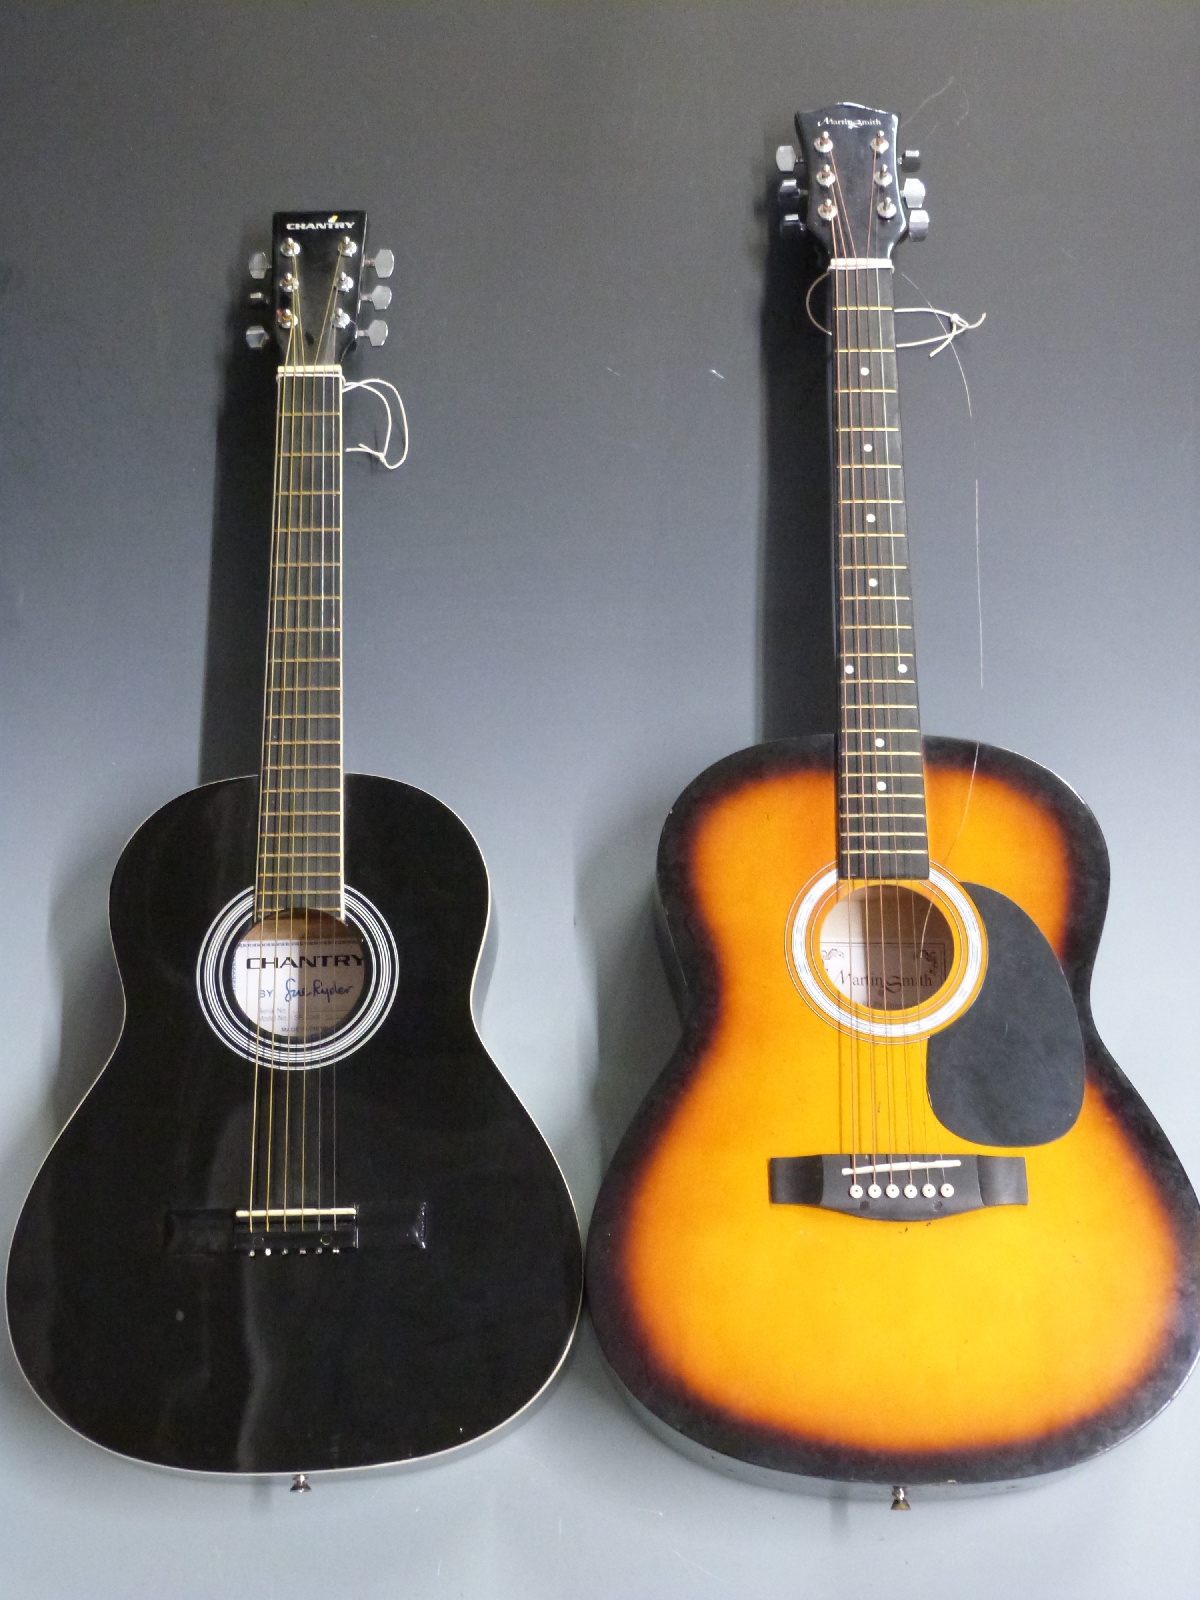 Two acoustic guitars comprising a Martin Smith in flame effect and a Chantry example in black